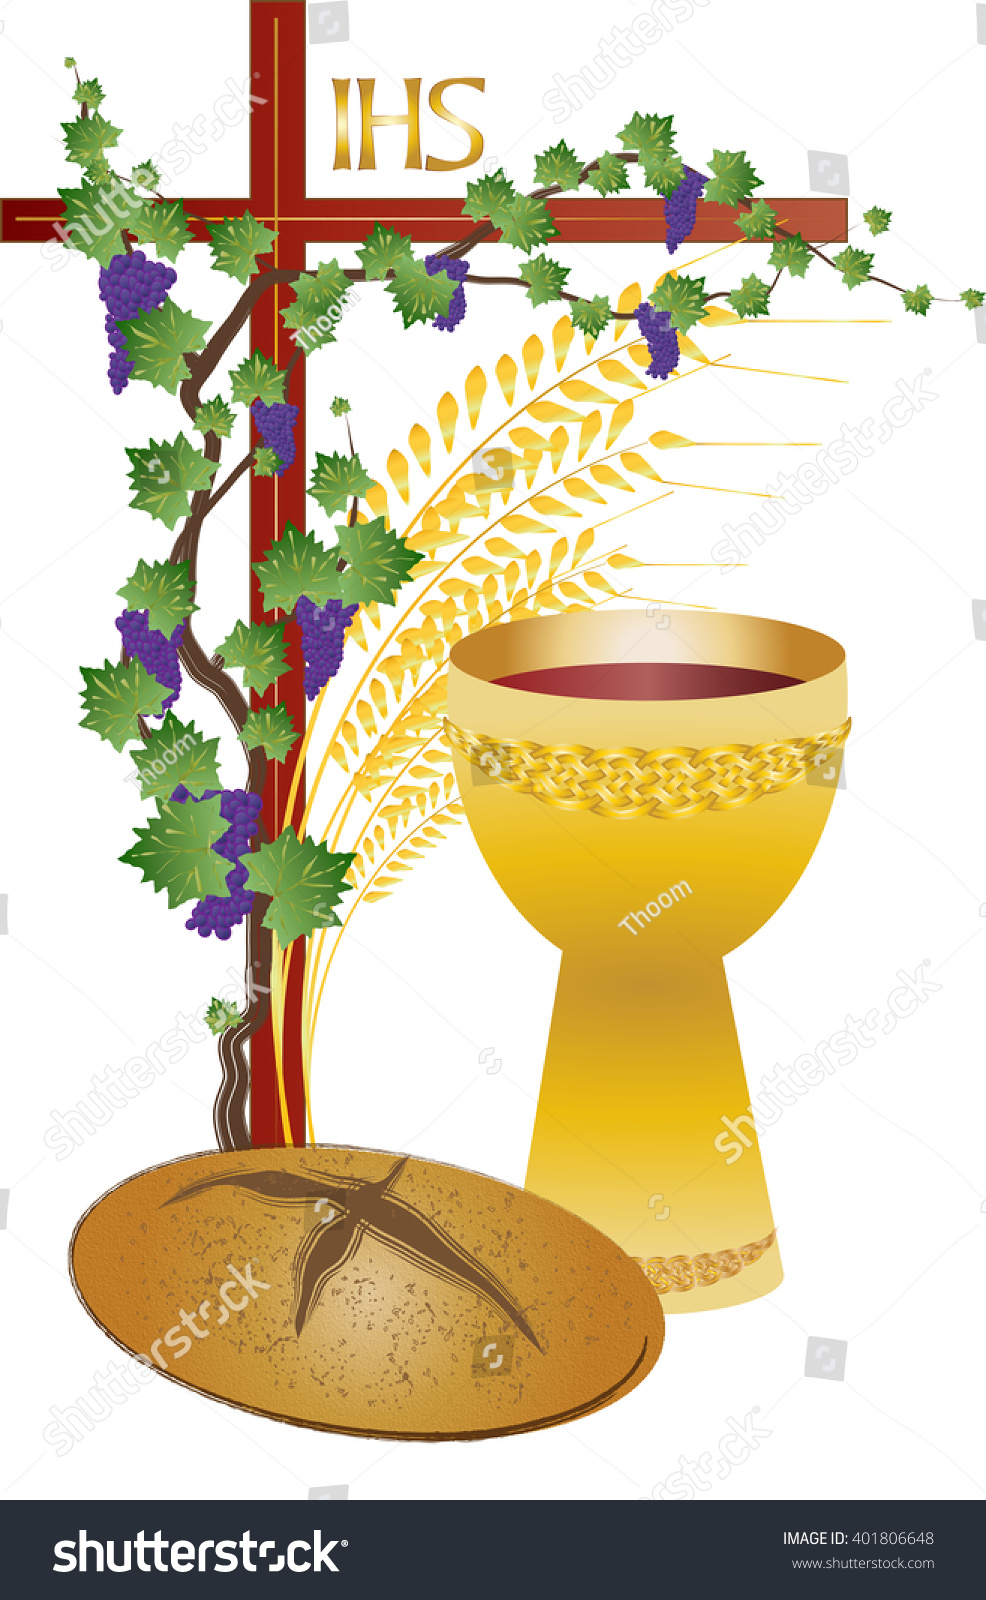 free christian clip art lord's supper - photo #41